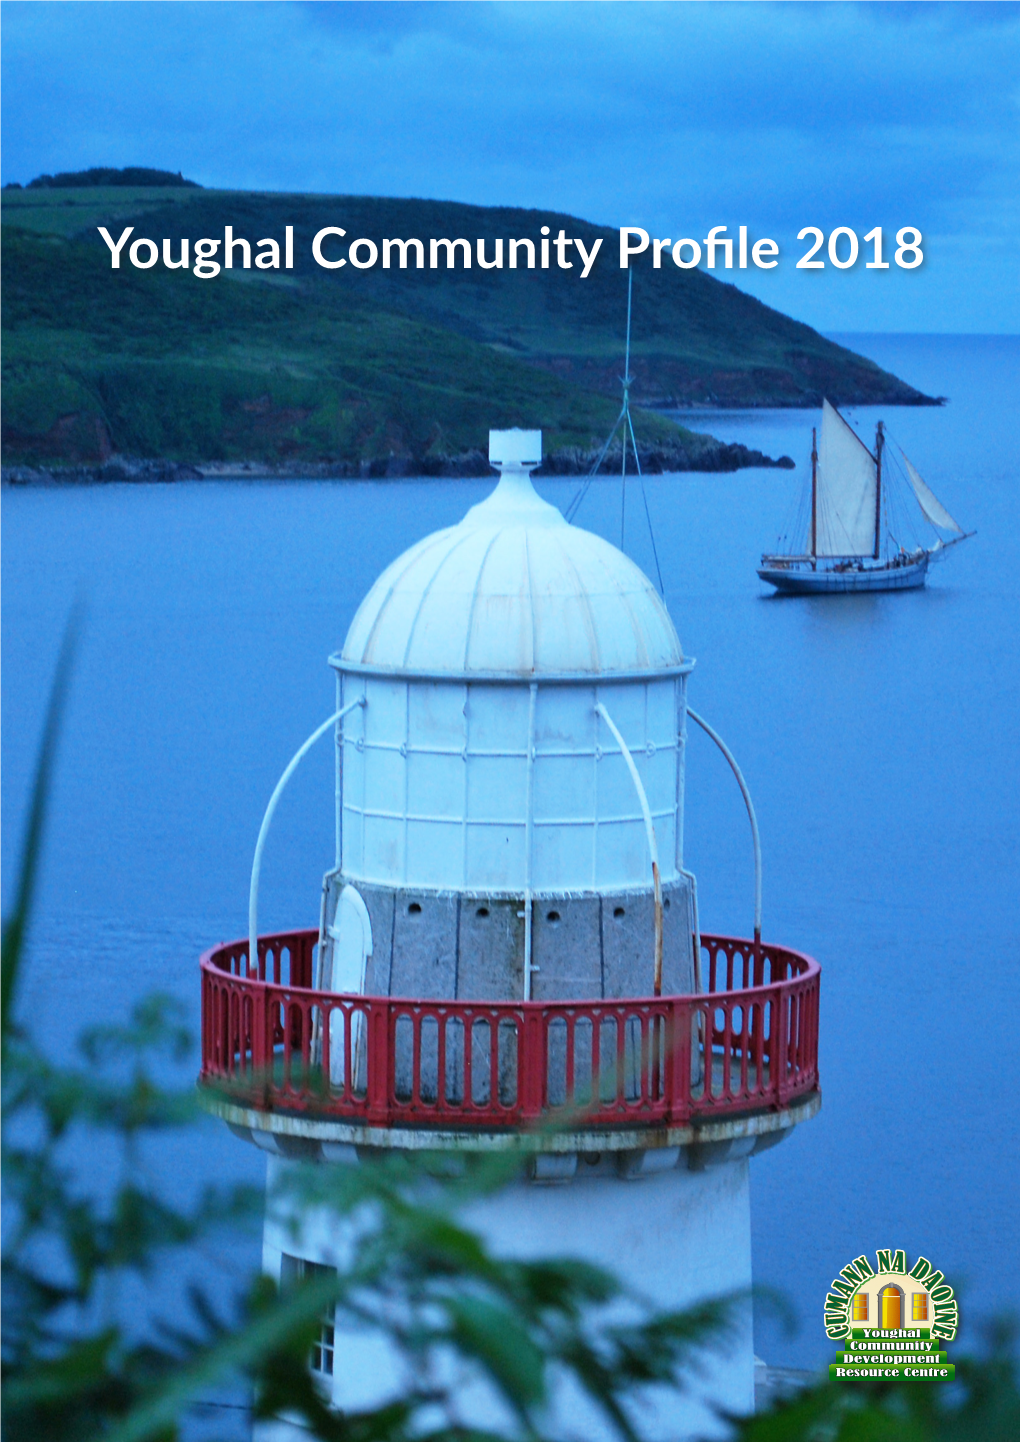 Youghal Community Profile 2018